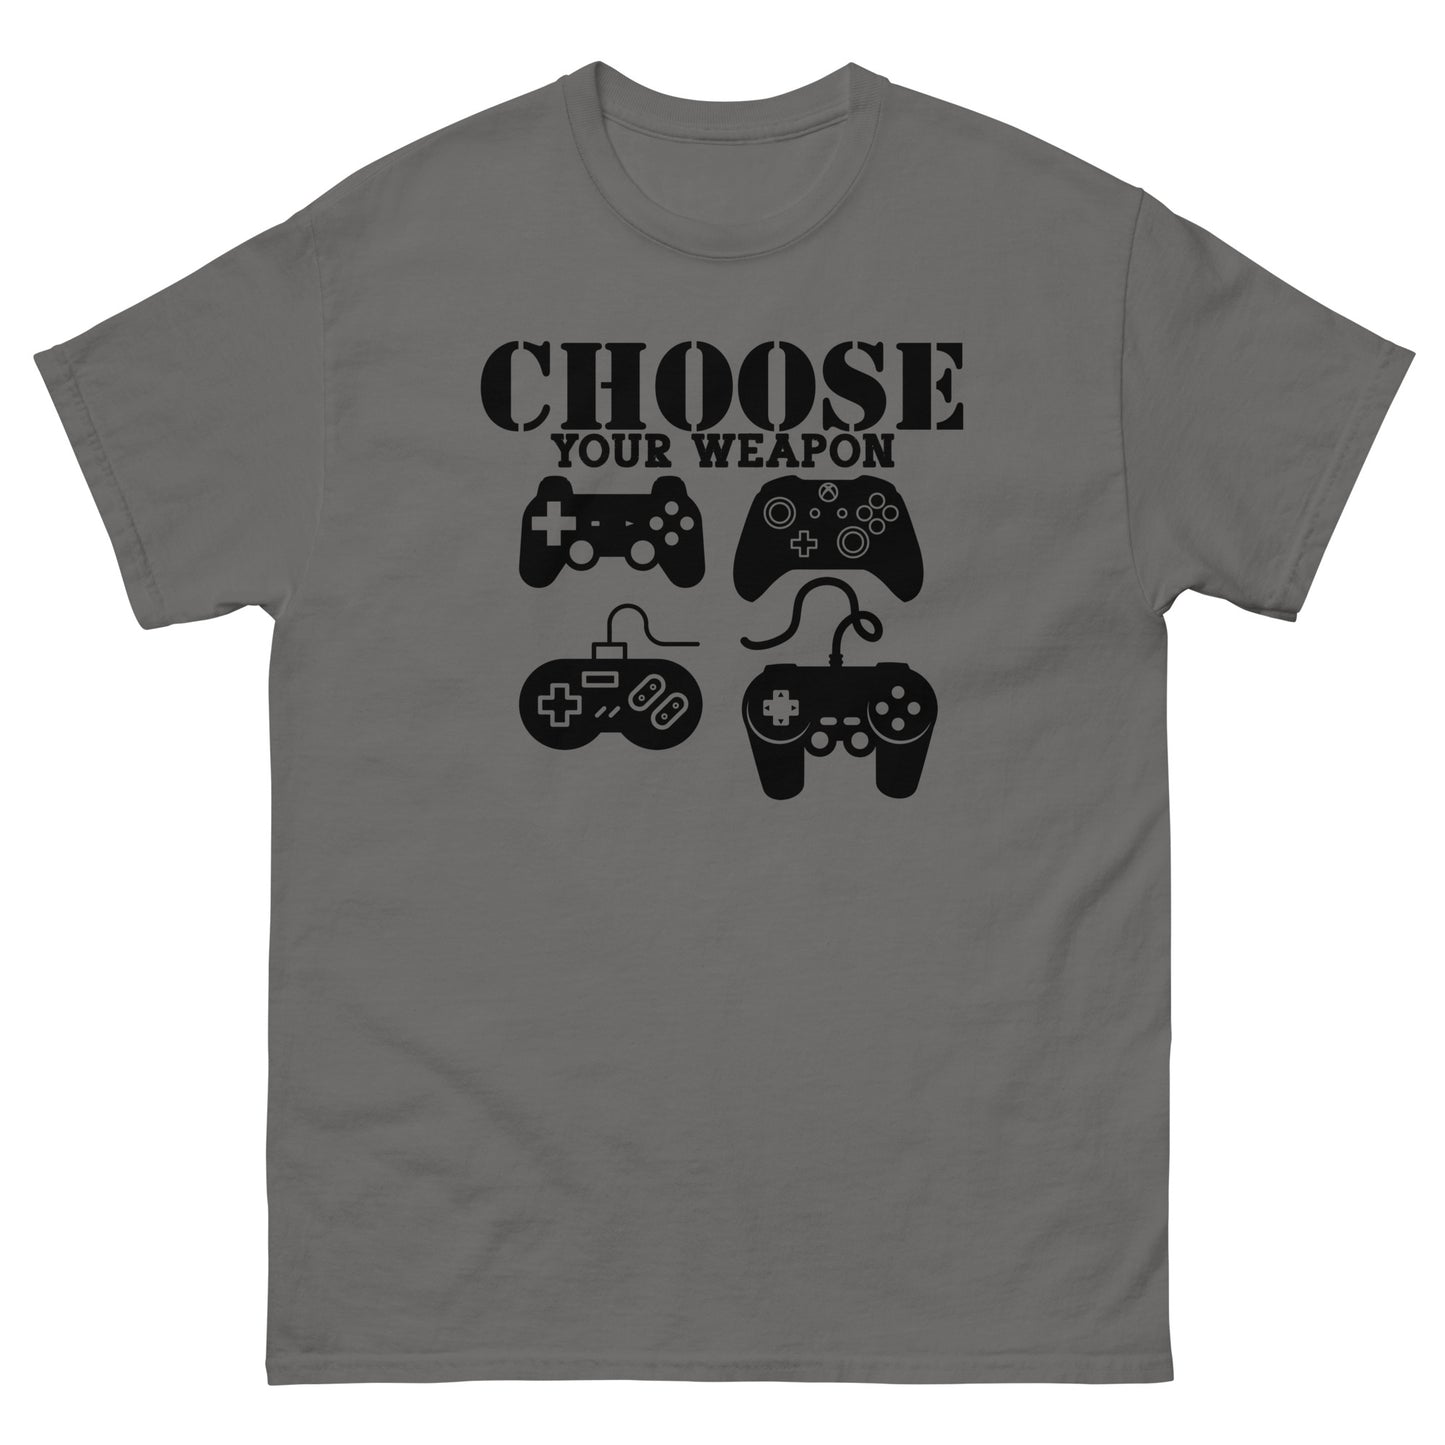 Choose your Weapon Tee